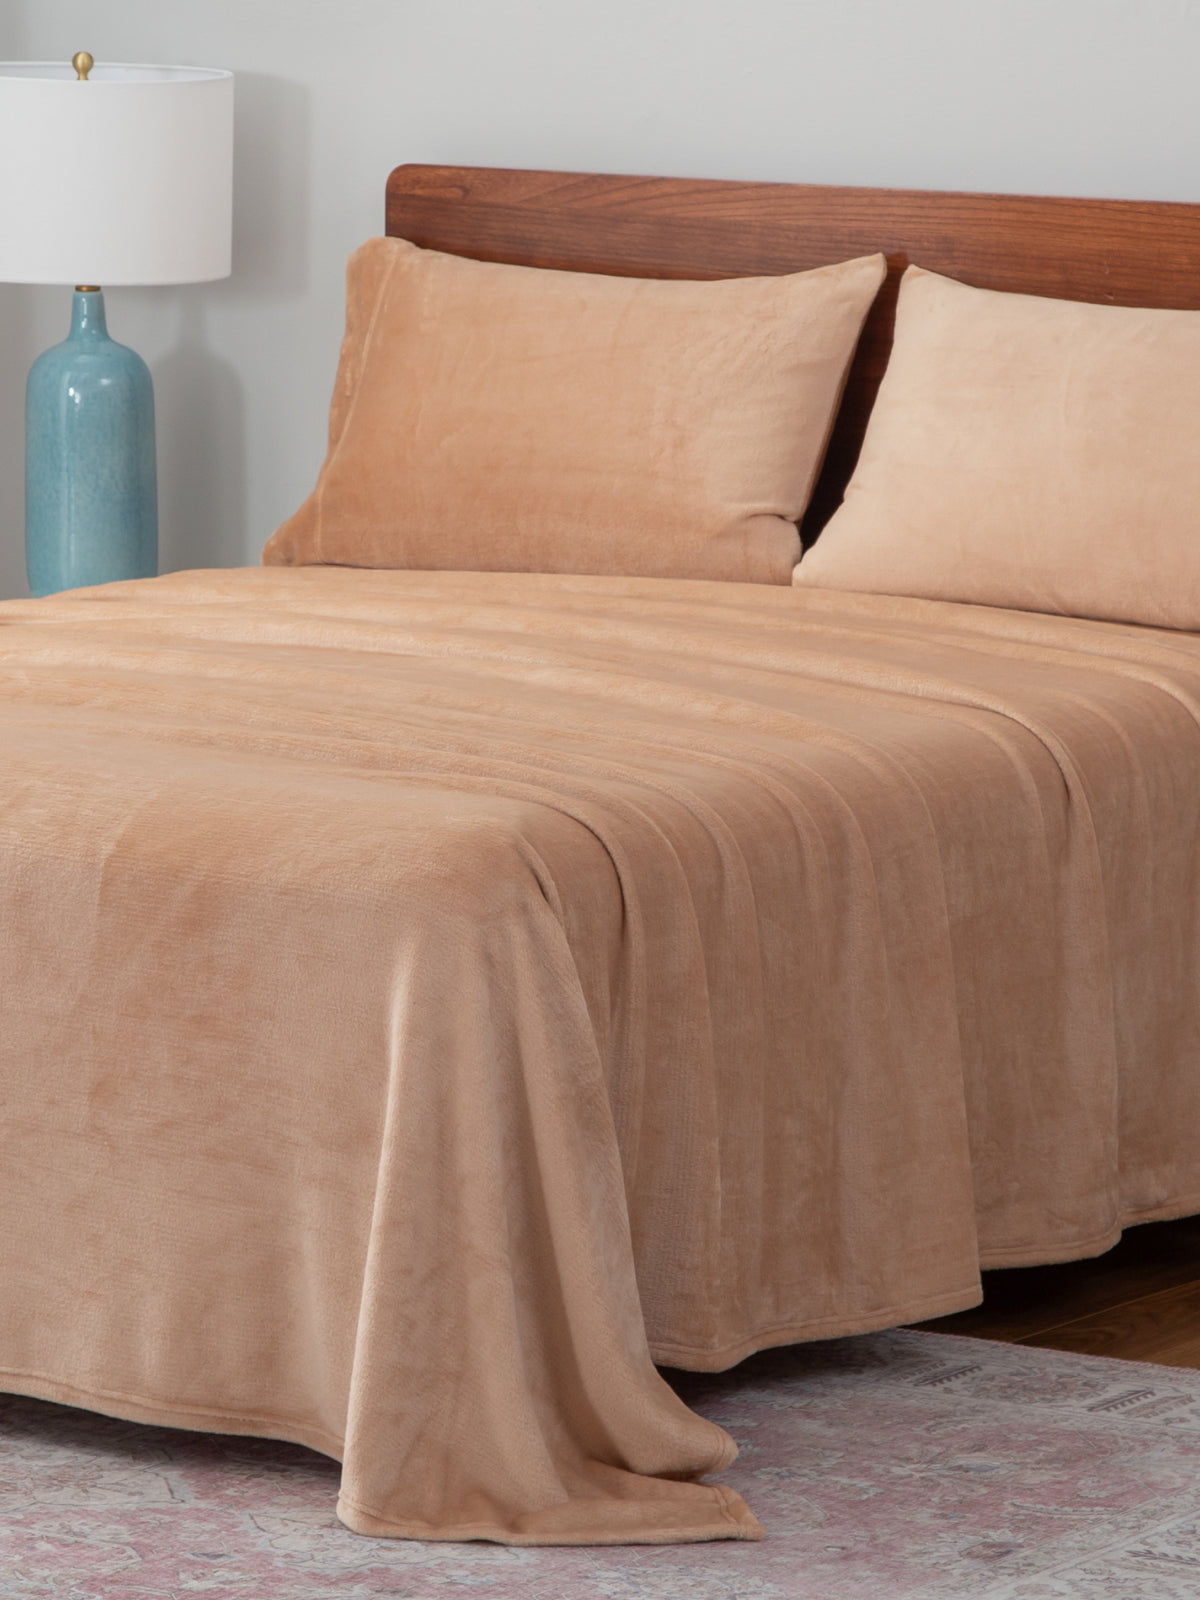 Sheets collection image featuring our VelvetLoft Sheets in Aruba Sand draped over a bed.